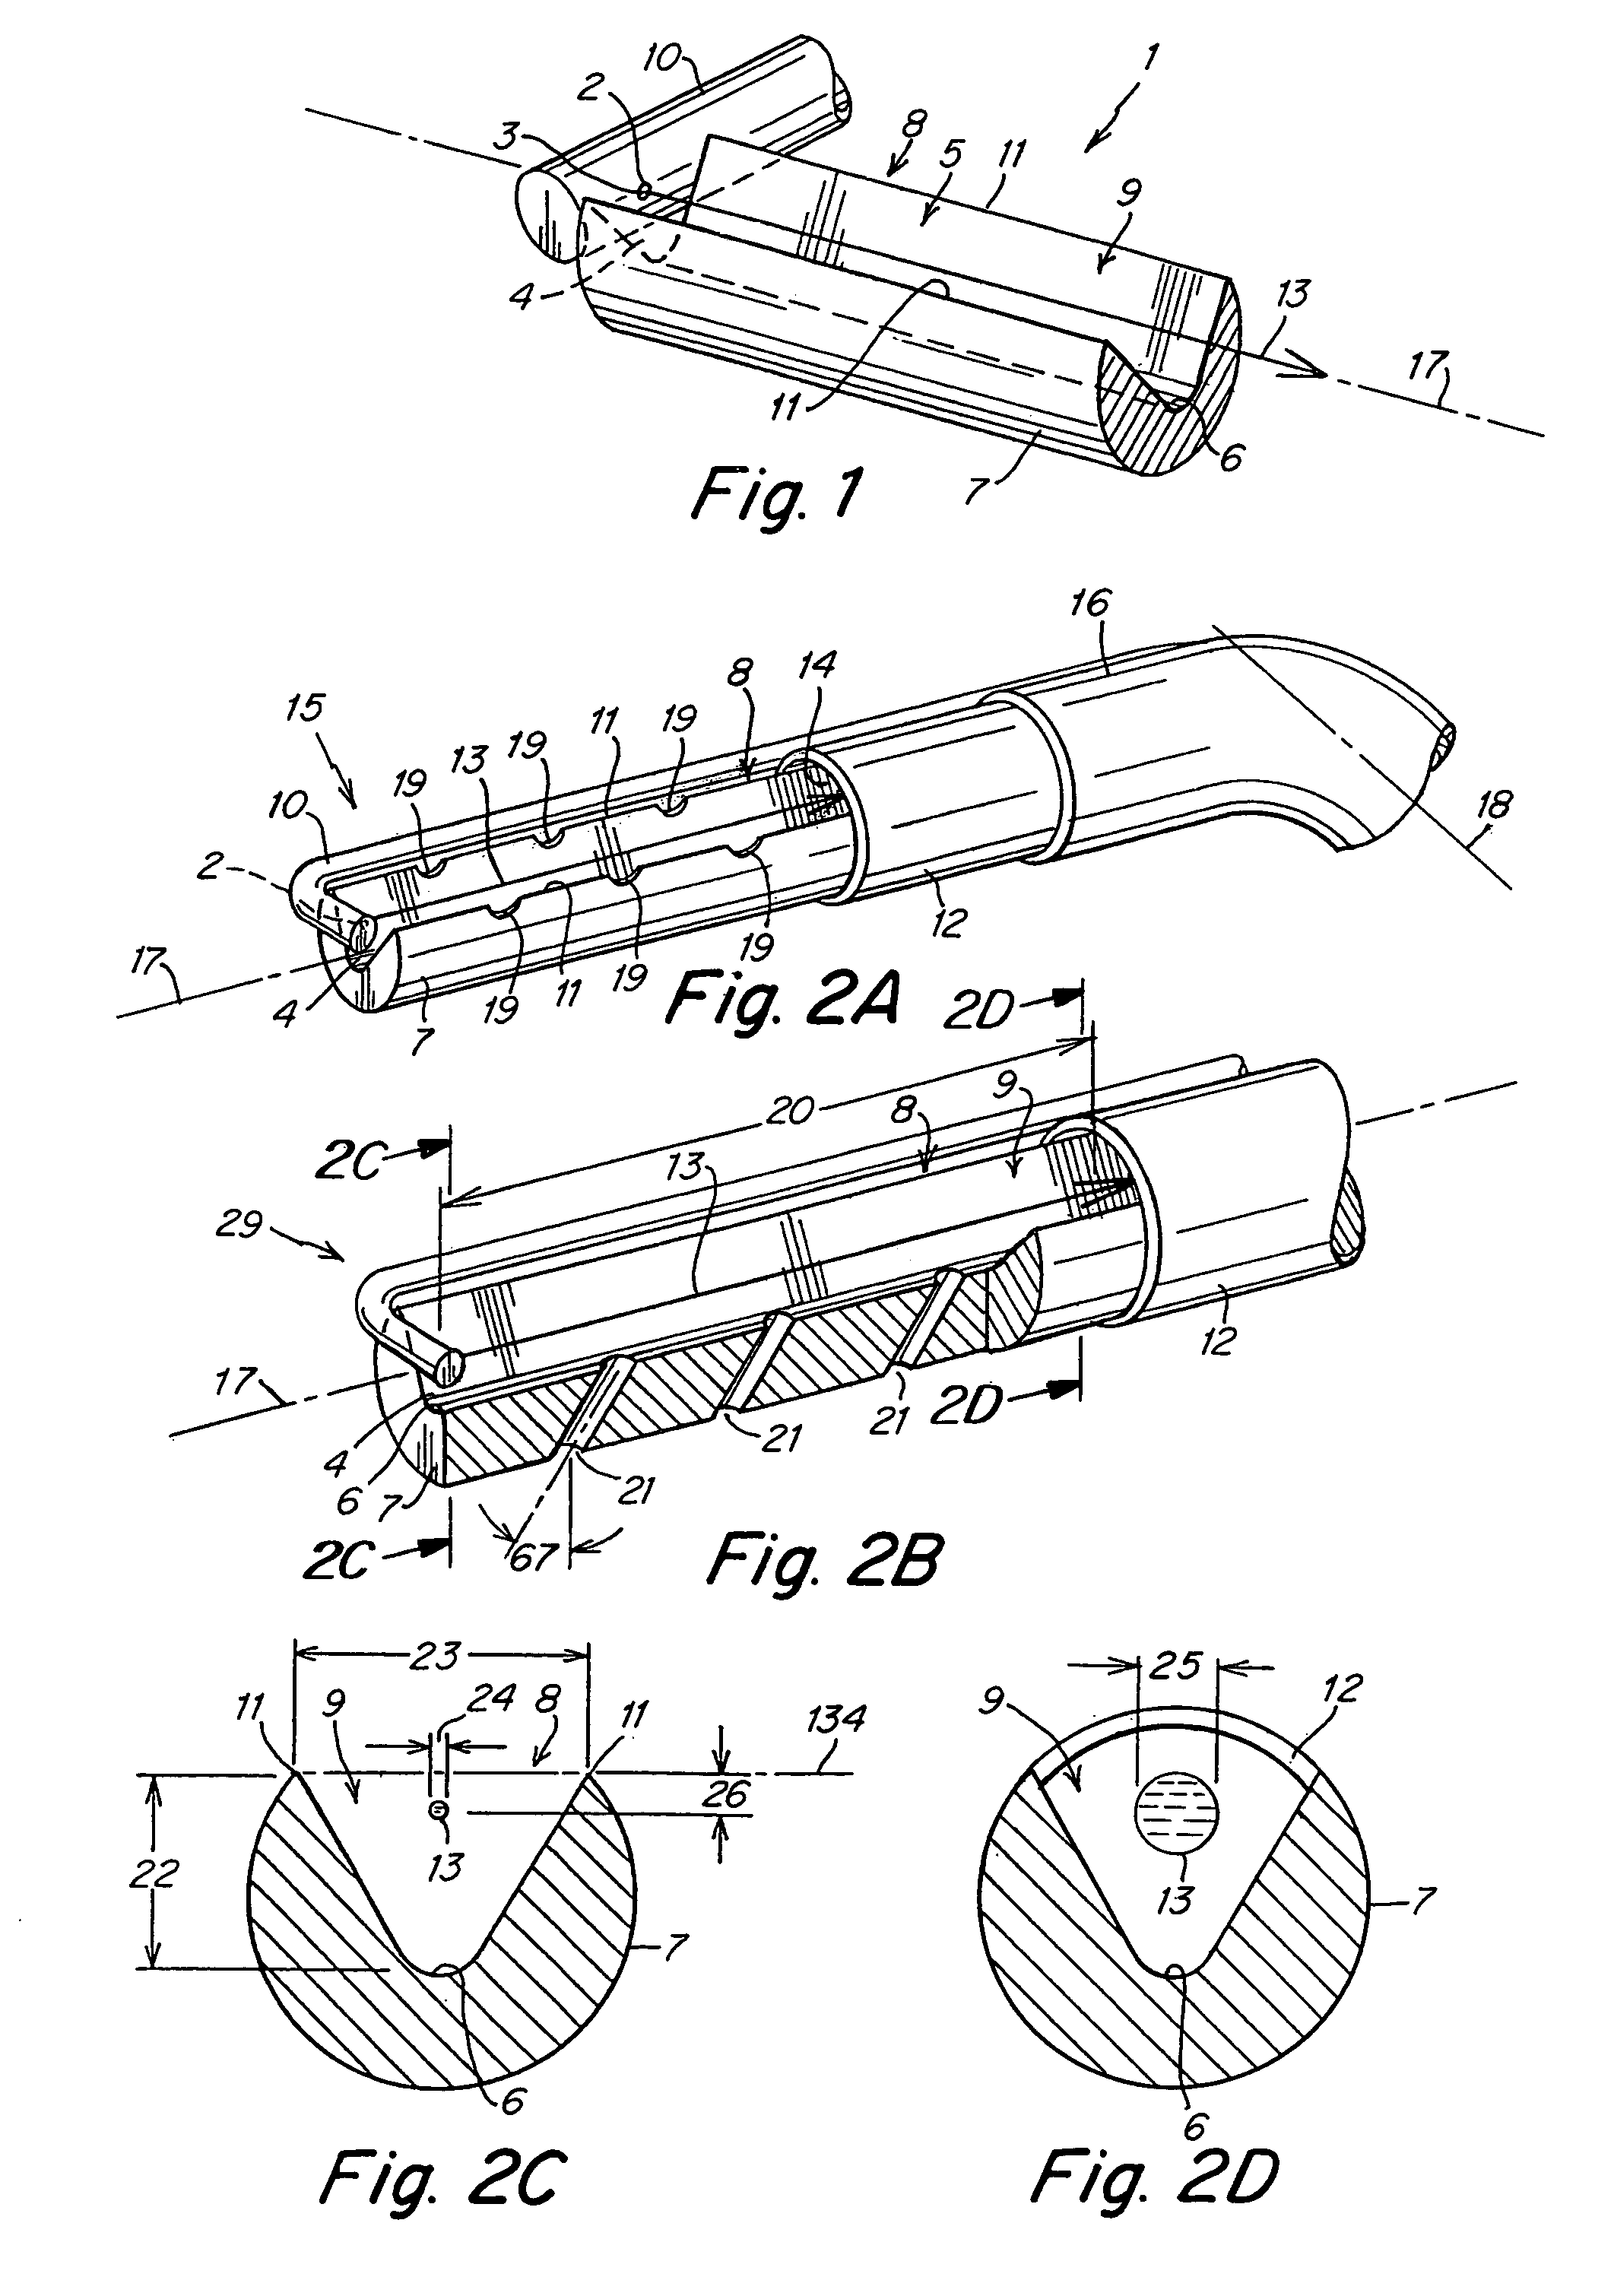 Liquid jet surgical instruments incorporating channel openings aligned along the jet beam